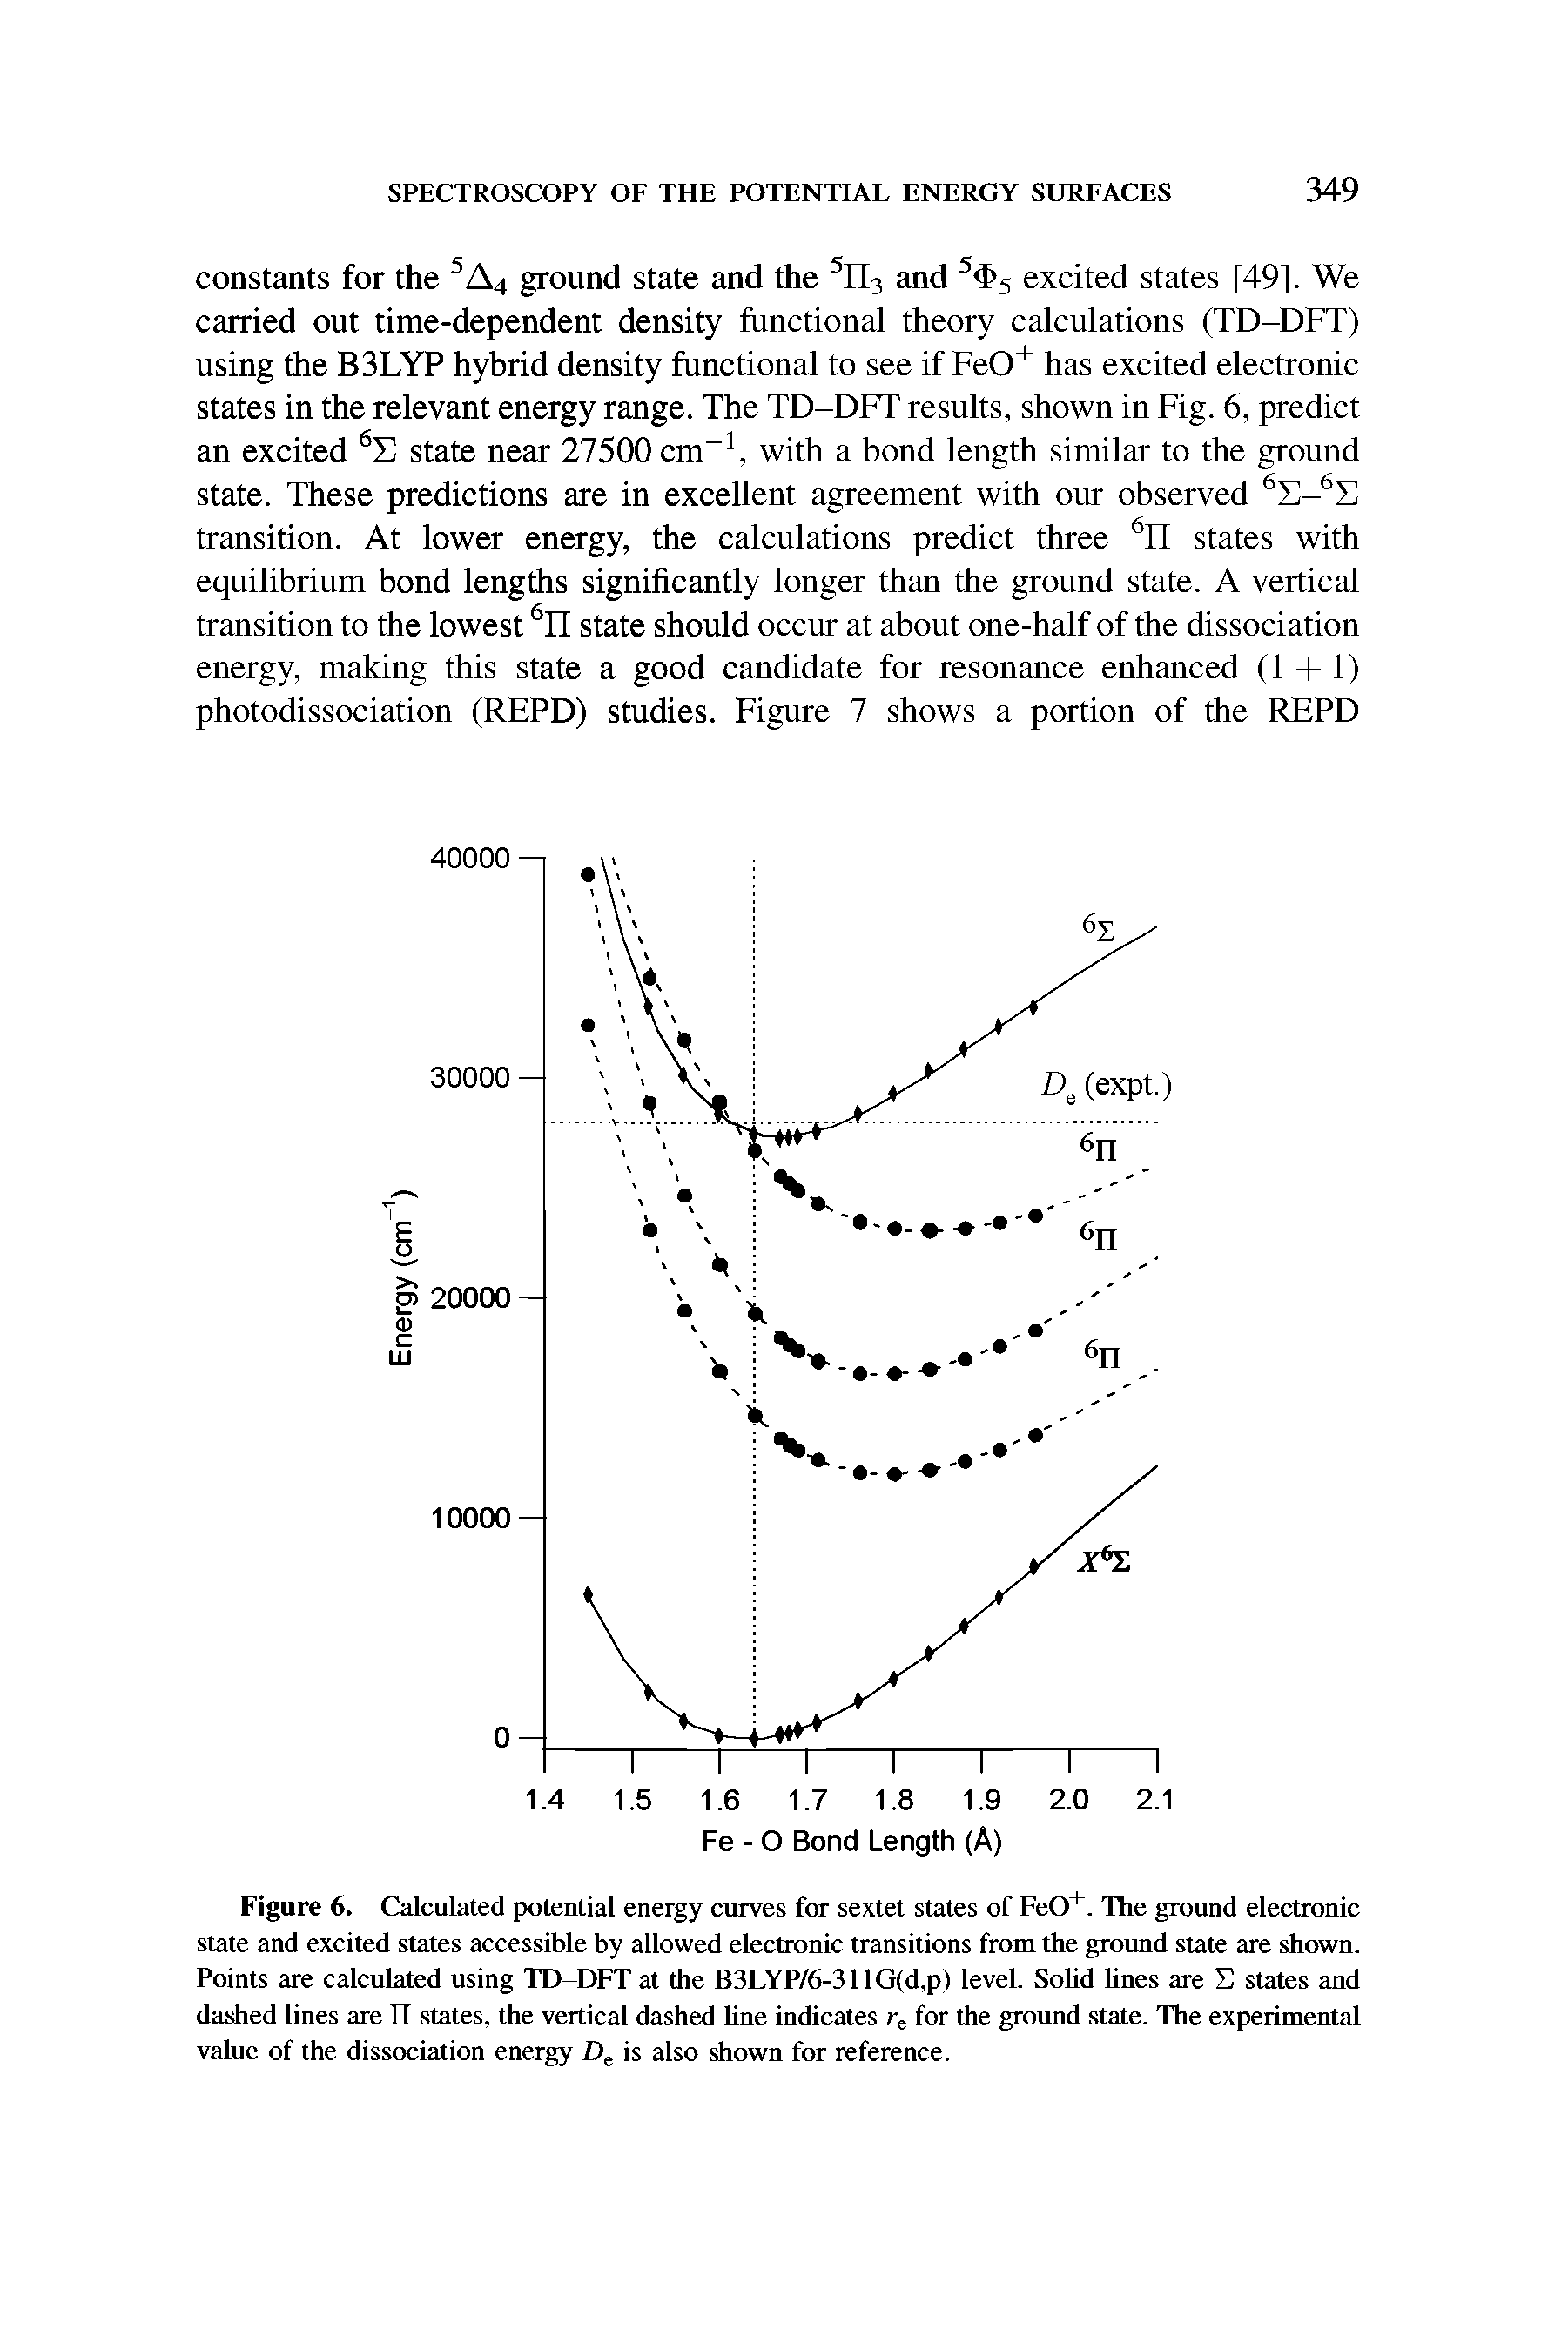 Figure 6. Calculated potential energy curves for sextet states of FeO. The ground electronic Slate and excited states accessible by allowed electronic transitions from the ground state are shown. Points are calculated using TD-DFT at the B3LYP/6-311G(d,p) level. Sohd hnes are S states and dashed lines are II states, the vertical dashed hne indicates for the ground state. The experimental value of the dissociation energy is also diown for reference.